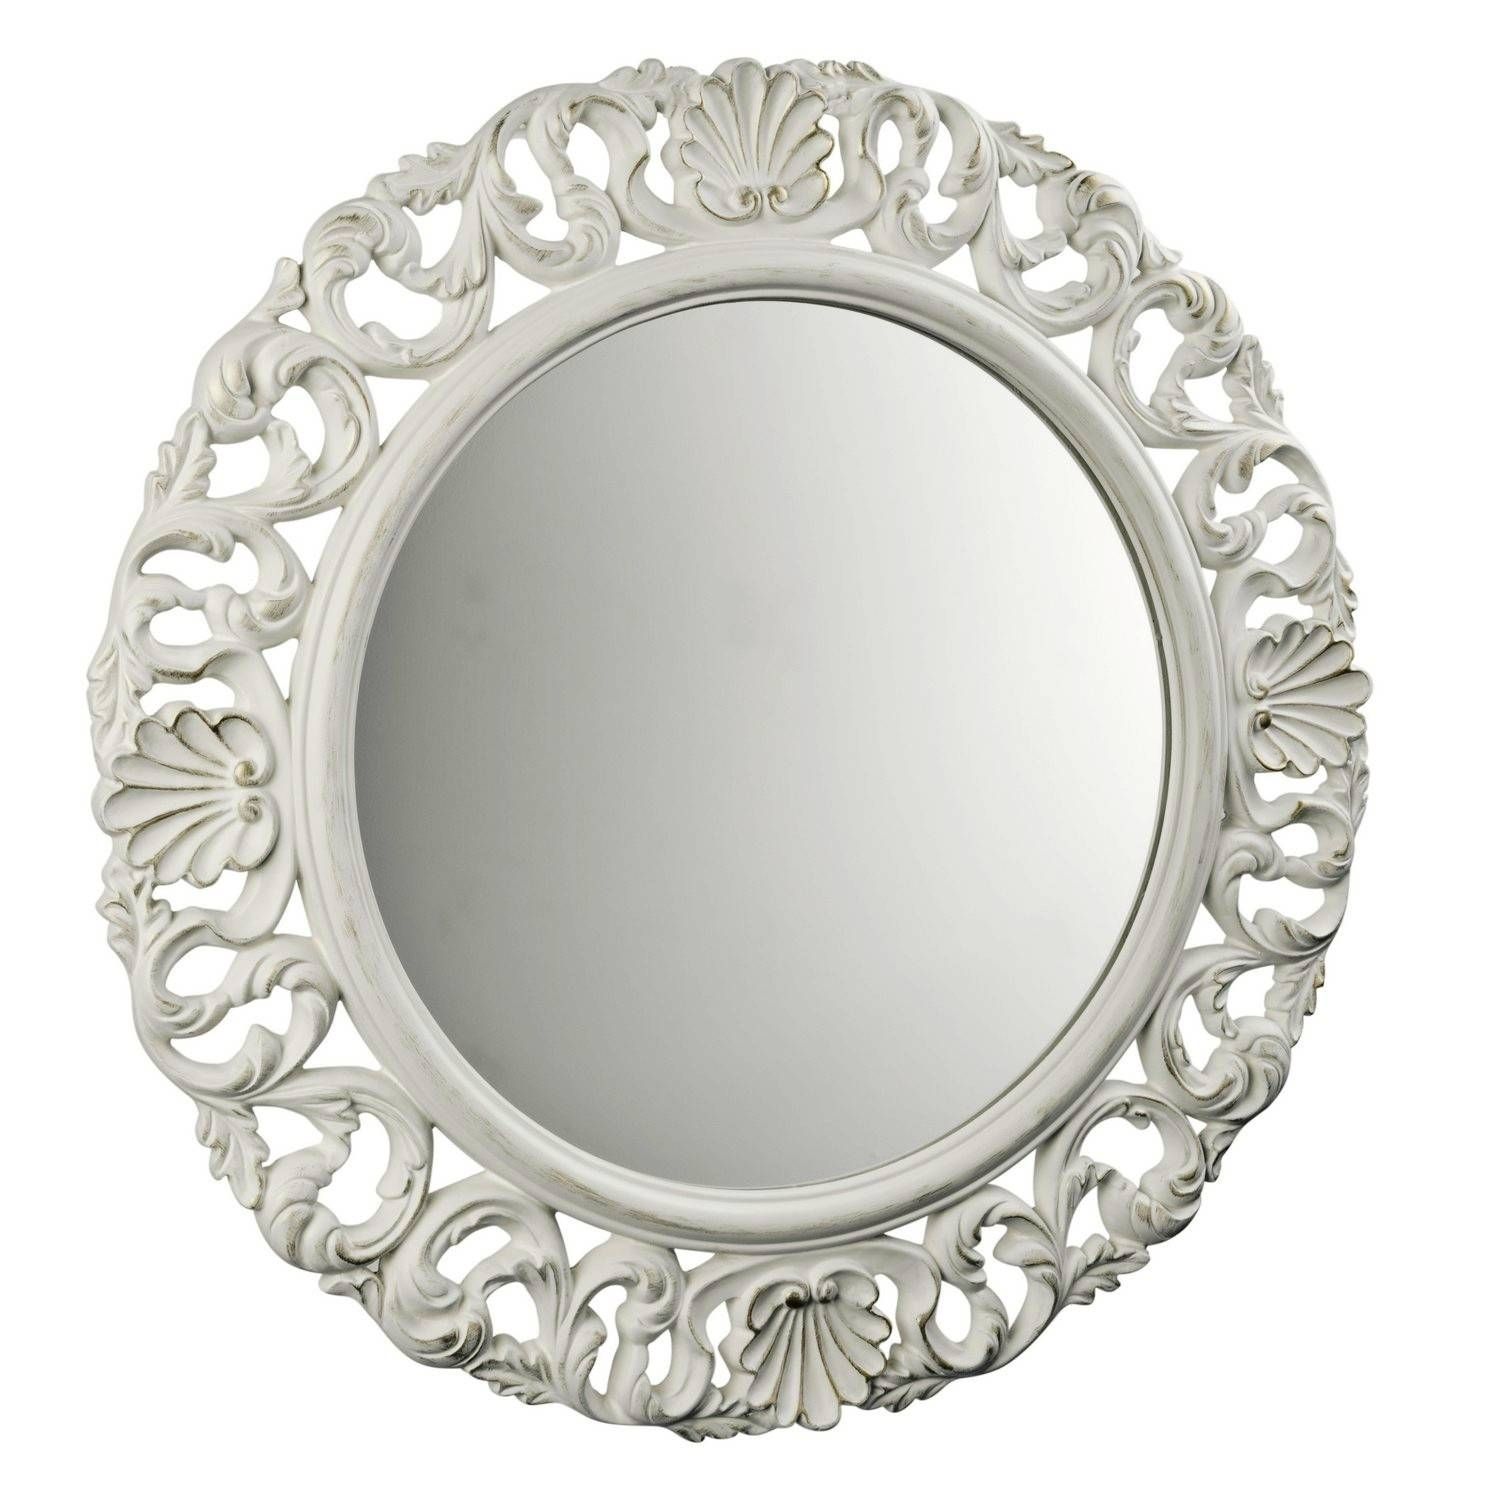 Beautiful Antique White Baroque Mirror | Decorcave With Regard To White Baroque Mirrors (View 12 of 25)